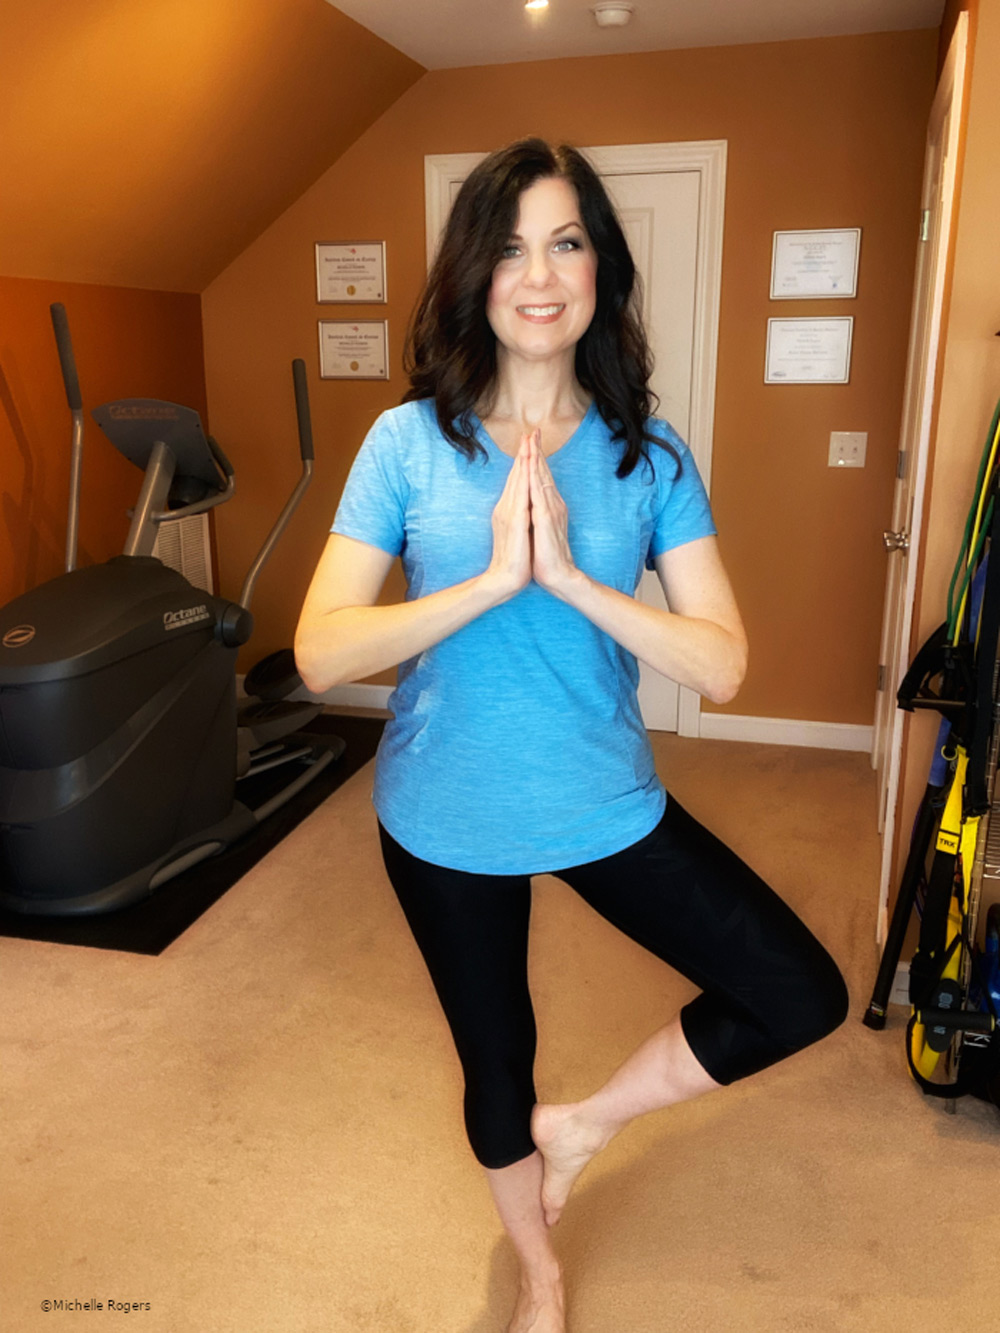 Tree Pose: Live Longer By Balancing On One Foot?